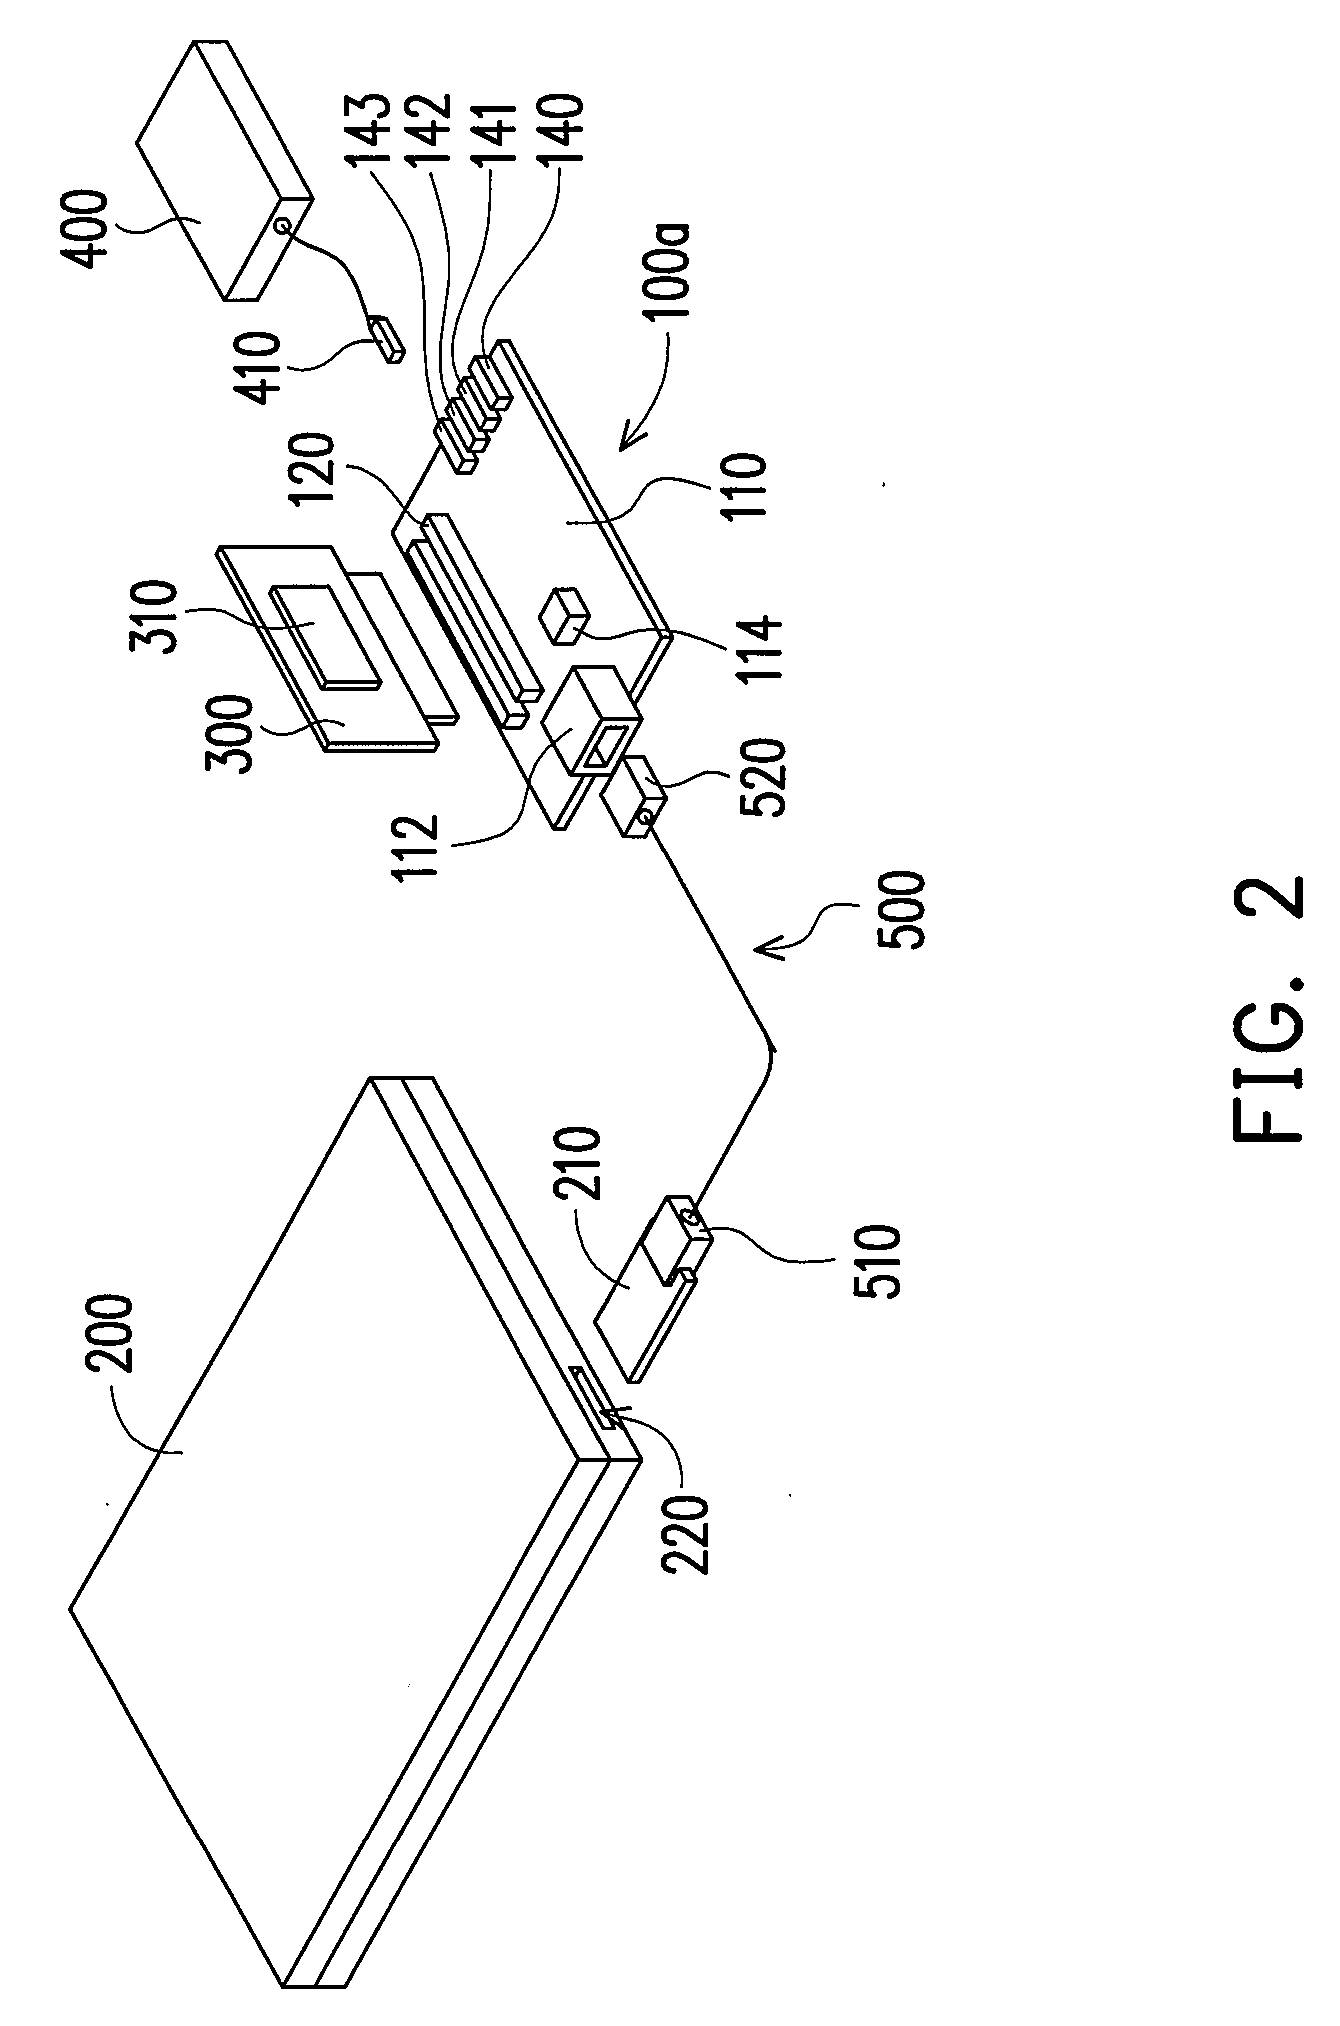 External multimedia expansion device